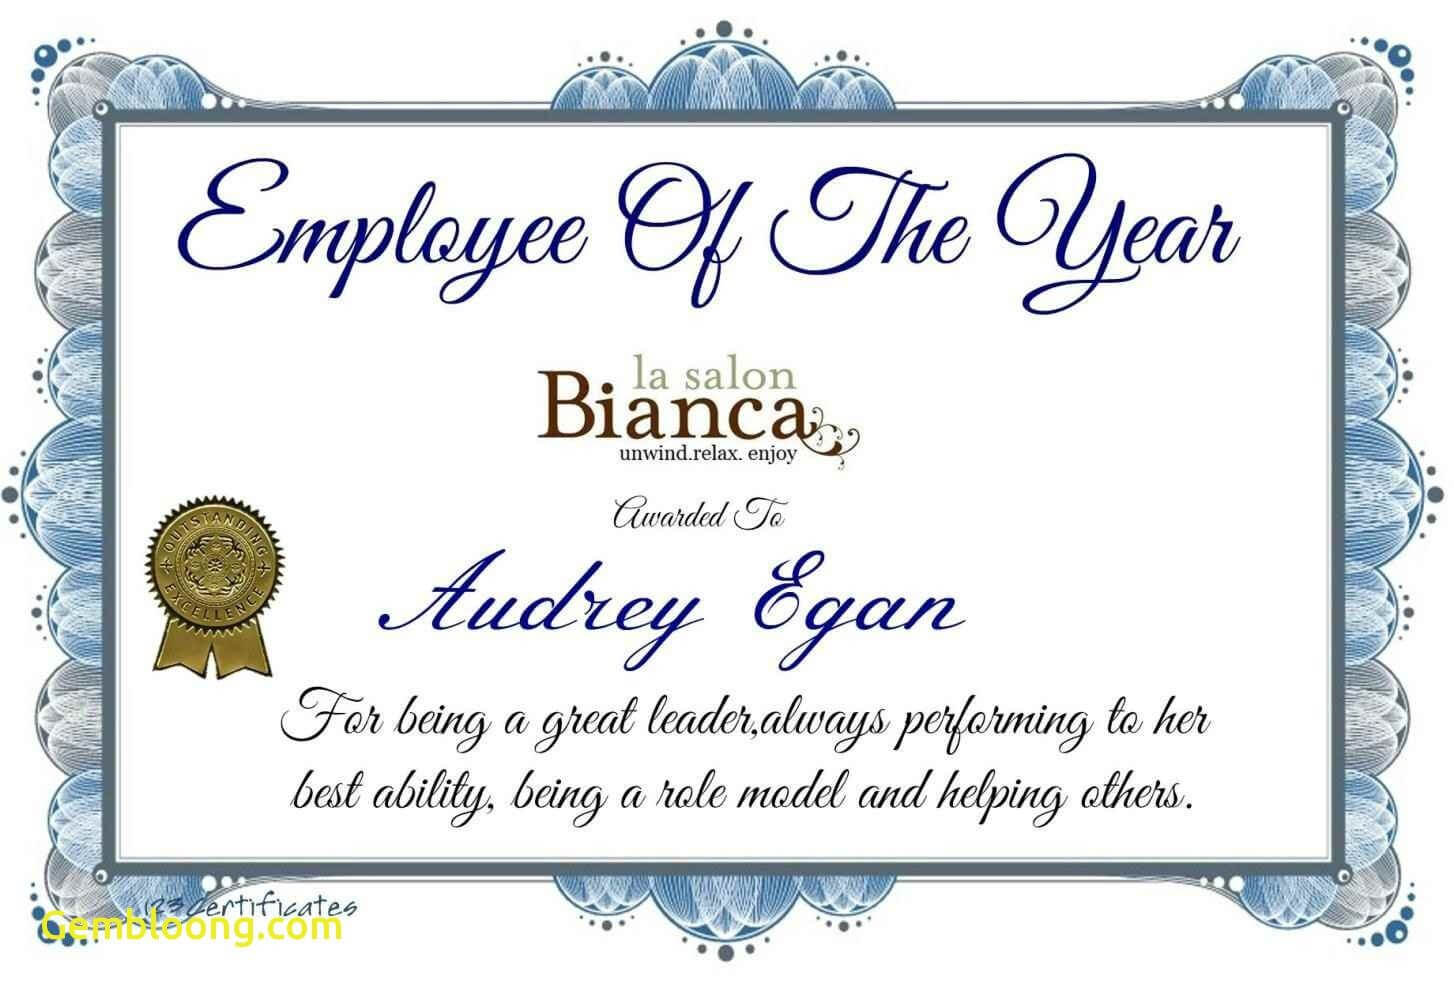 Employee Of The Year Certificate Template Update234 Com With Best Employee Award Certificate Templates